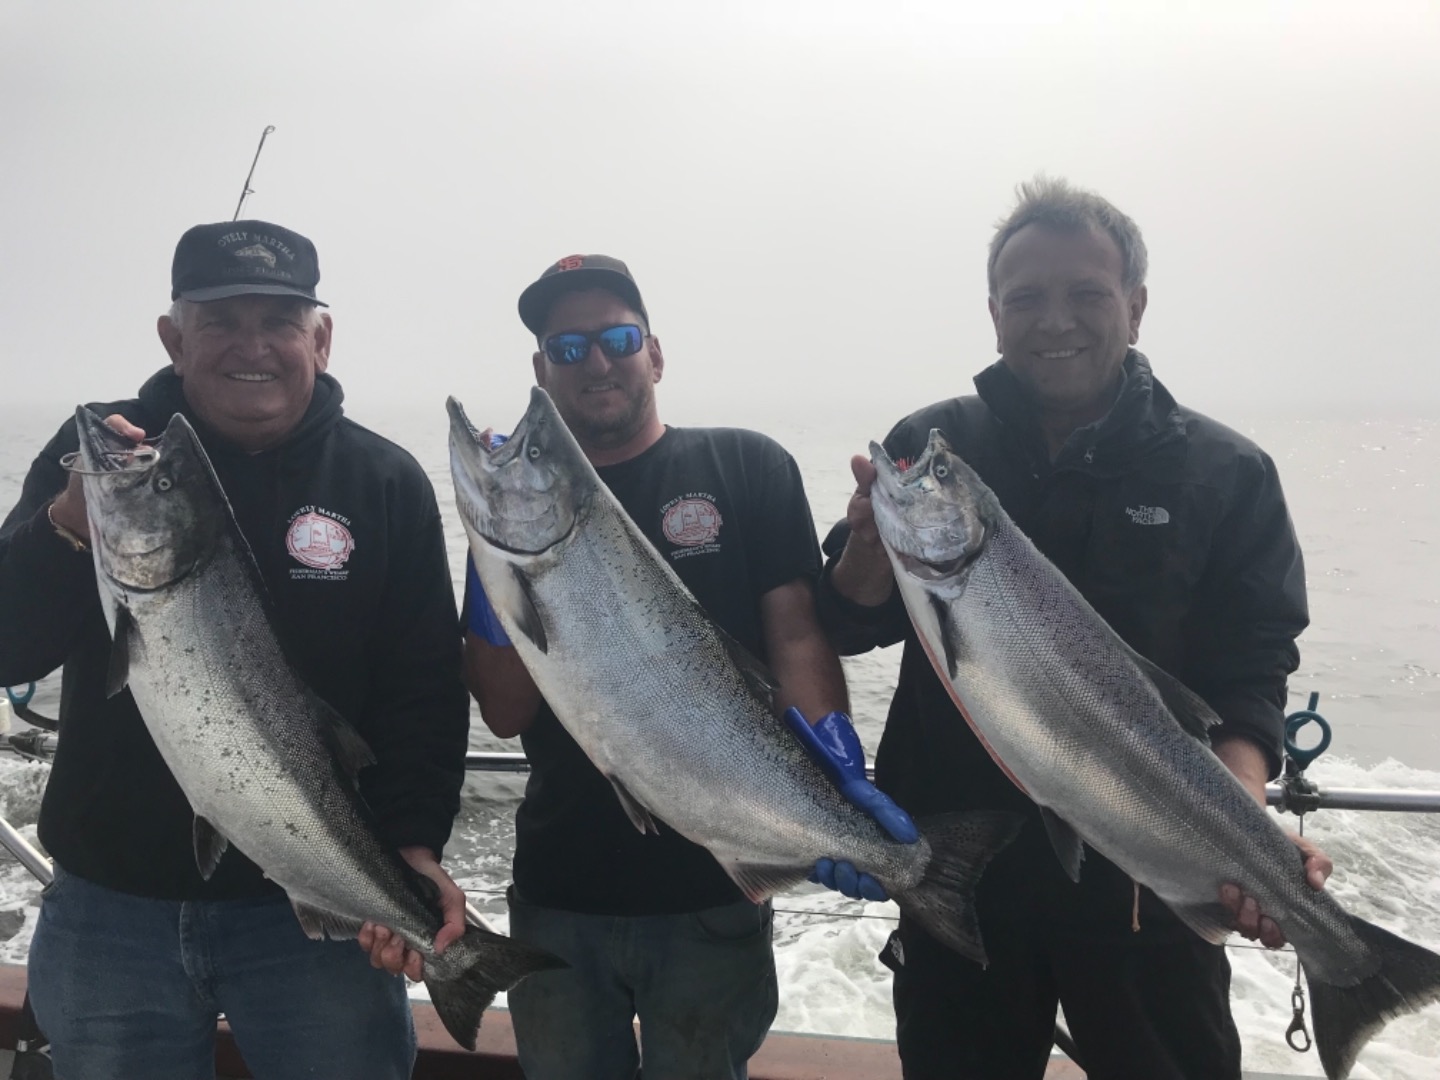 Salmon fishing continues to be excellent!!